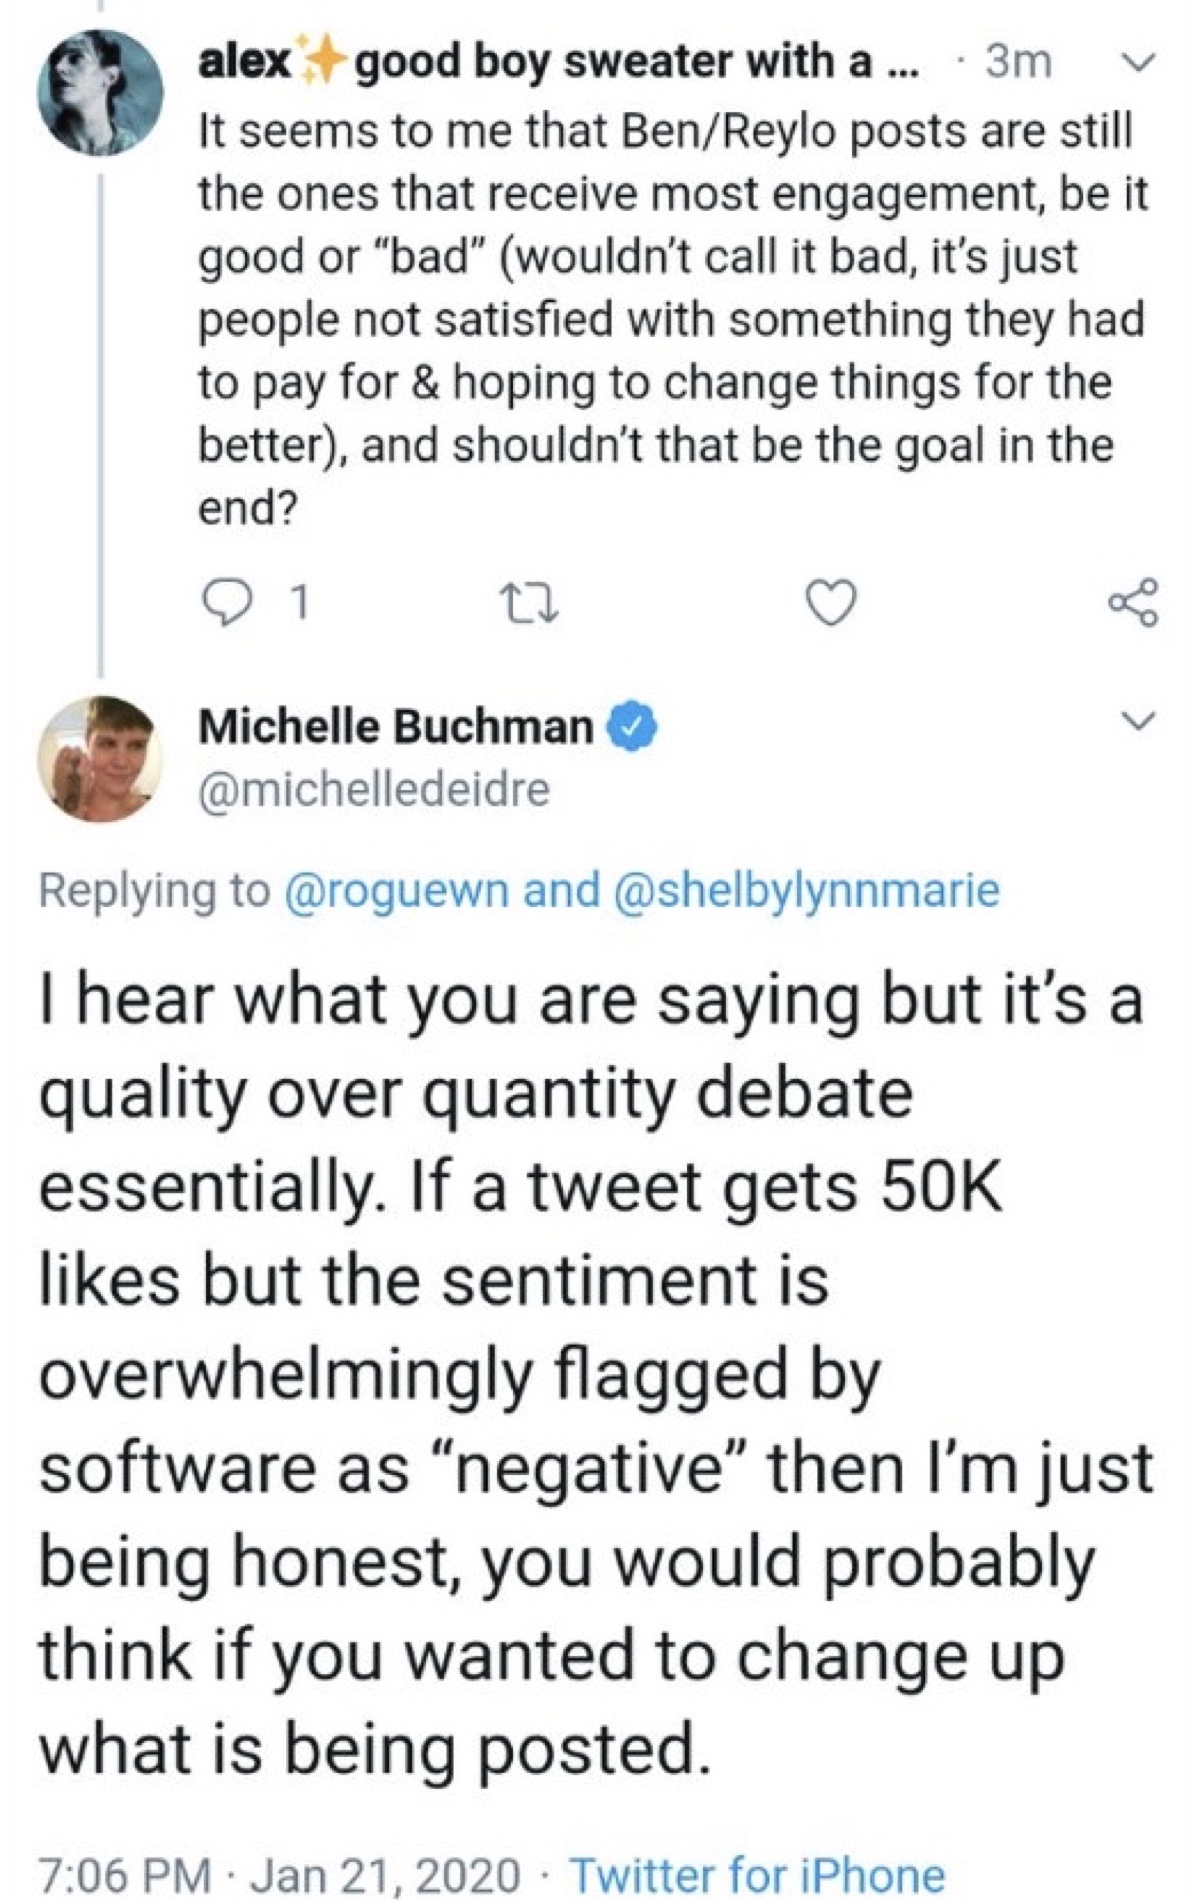 Buchman said Reylo posts generate engagement that’s overwhelmingly flagged by software as “negative” (Twitter - @saltandrockets)